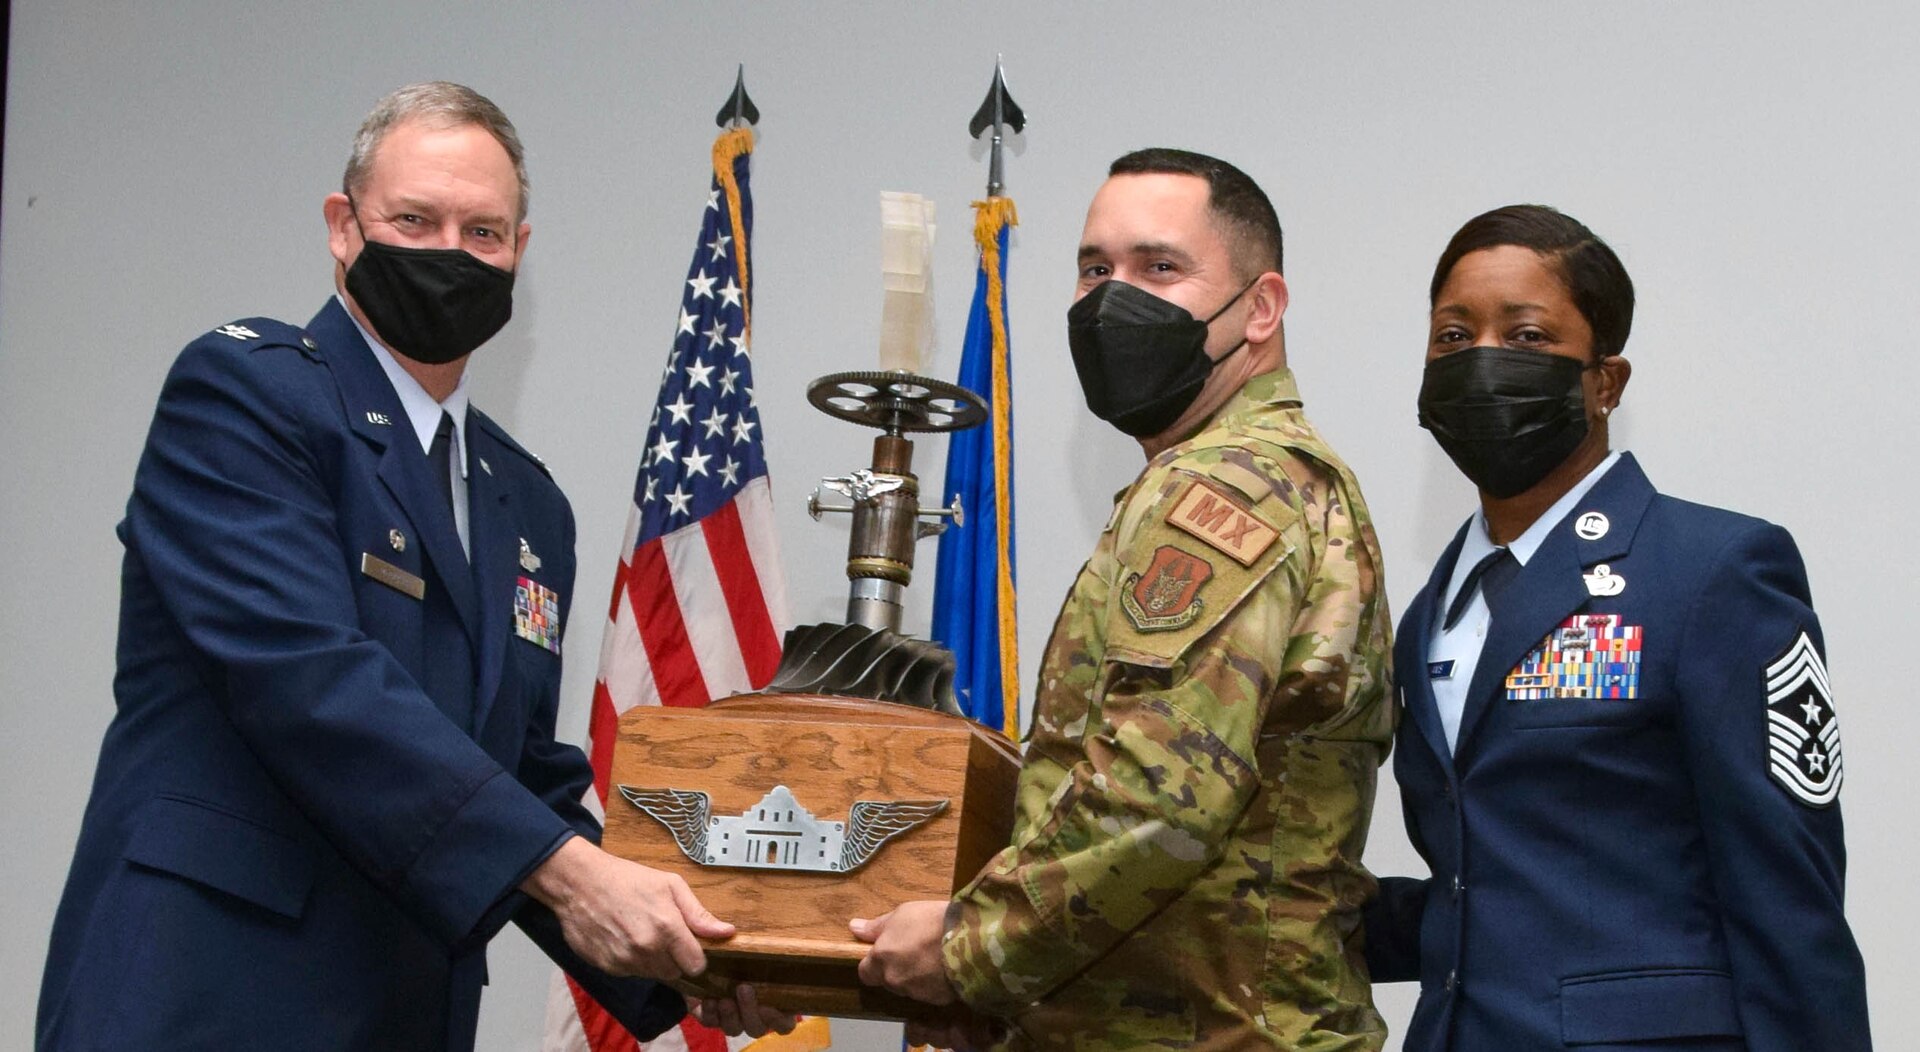 Maj. Nicholas Velazquez, 433rd Maintenance Squadron commander, accepts the Alamo Wing Combat Ready Spirit Award on behalf of the 433rd MXS from Col. Terry McClain, 433rd Airlift Wing commander, and Chief Master Sgt. Takesha Williams, 433rd AW command chief, at the wing’s annual awards ceremony Feb. 5, 2022, at Joint Base San Antonio-Lackland, Texas. (U.S. Air Force photo by Staff Sgt. Monet Villacorte)